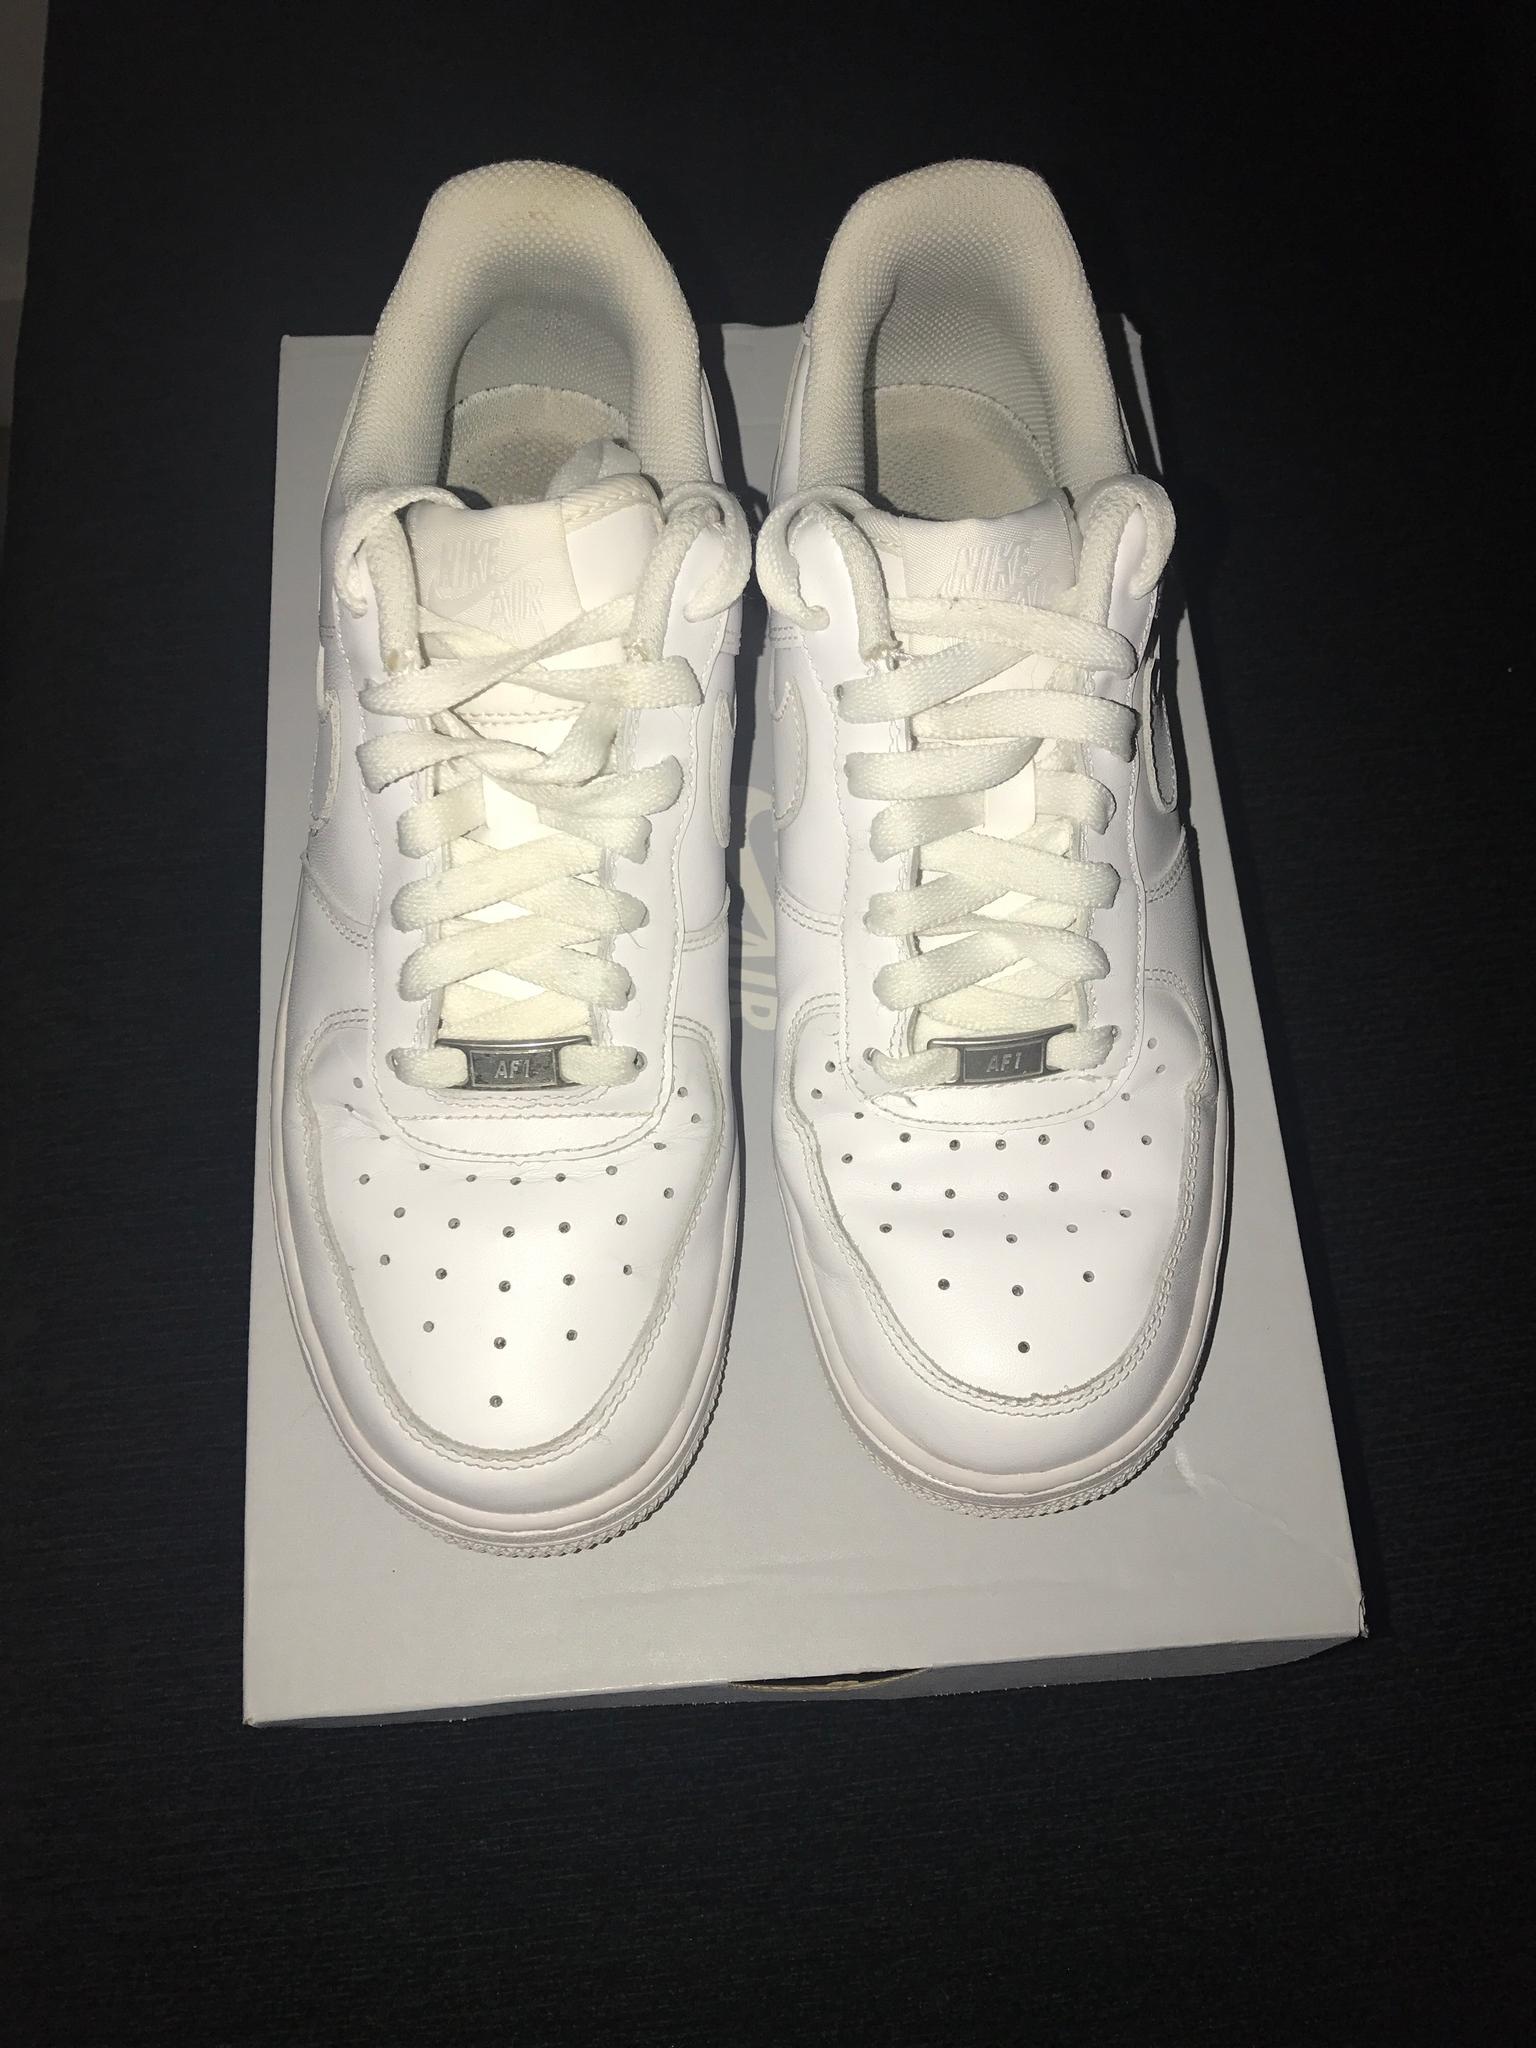 womens nike air force 1 size 9.5